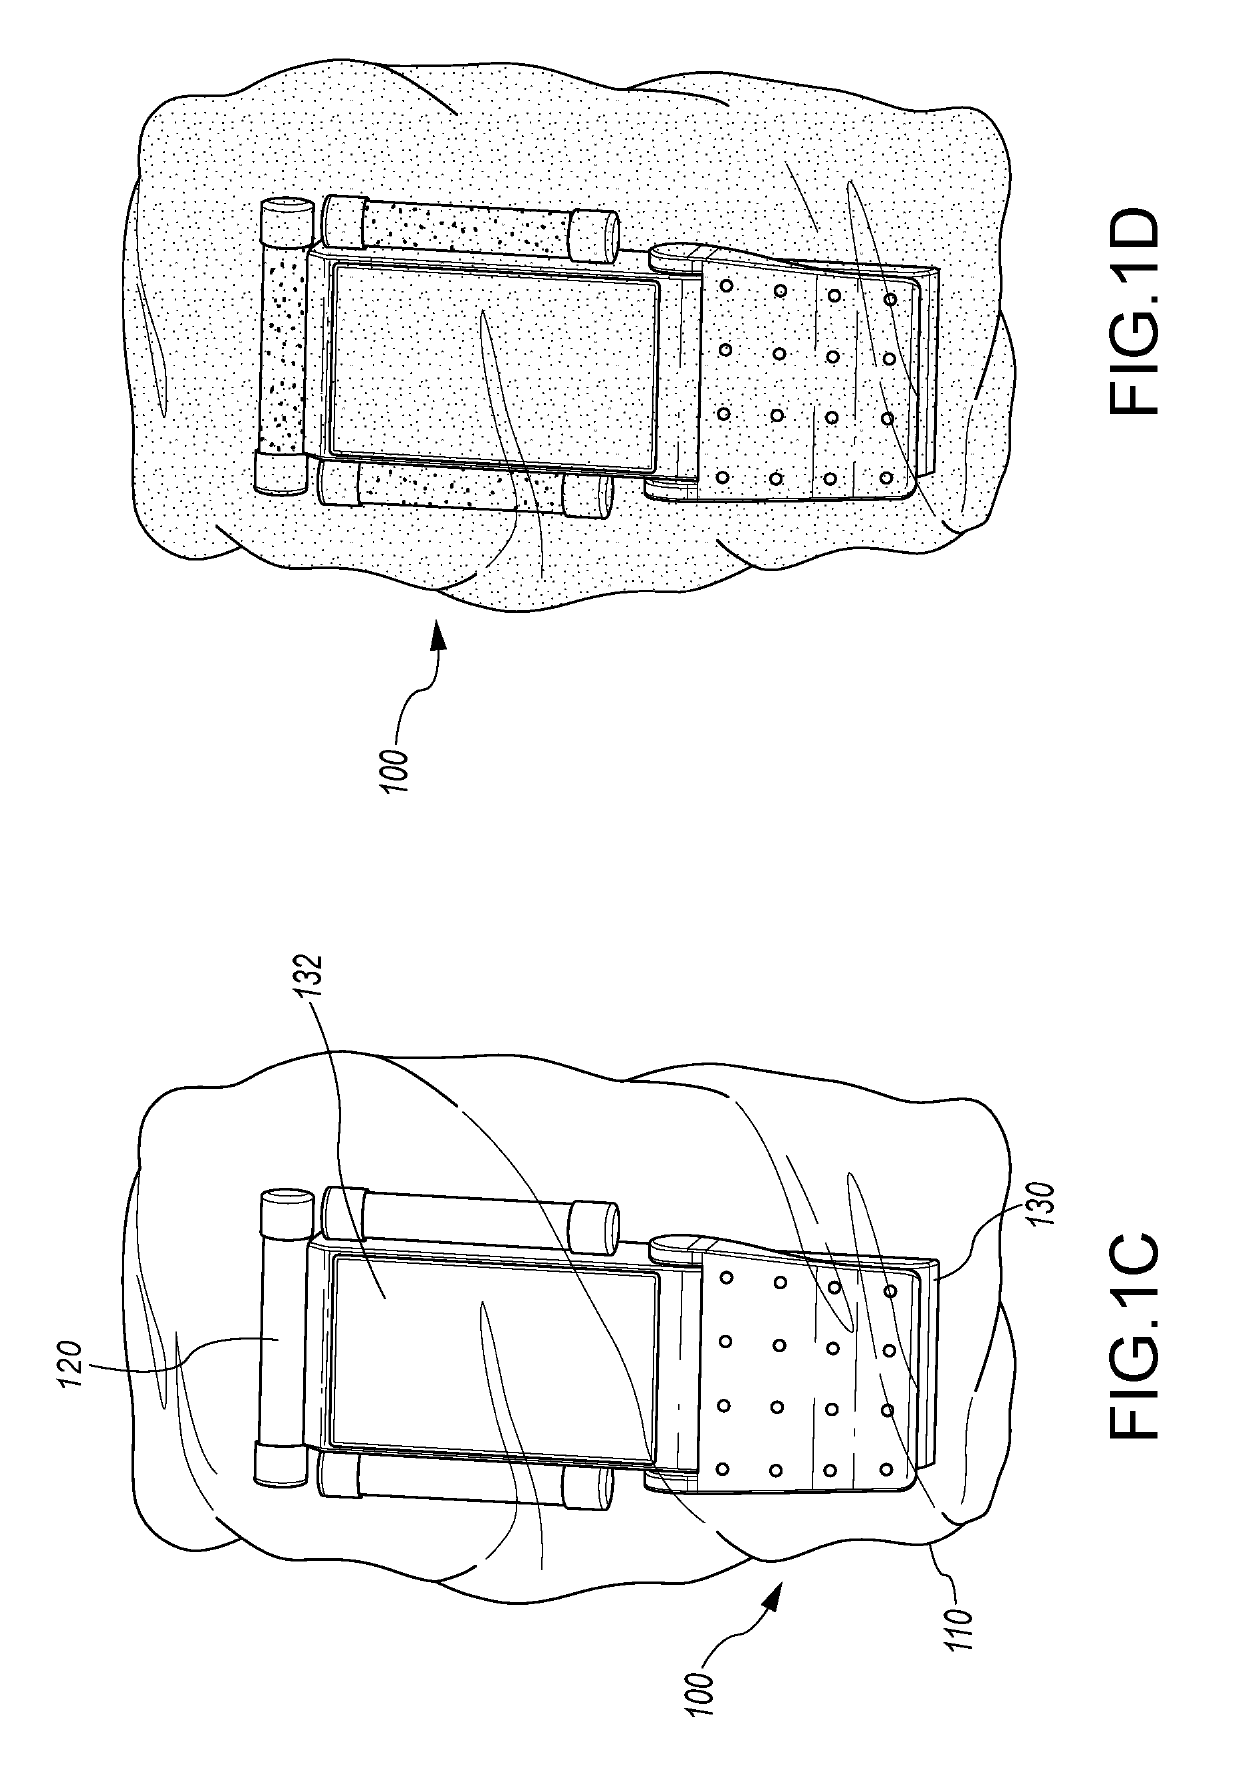 UV light illuminated surgical covering apparatus and method